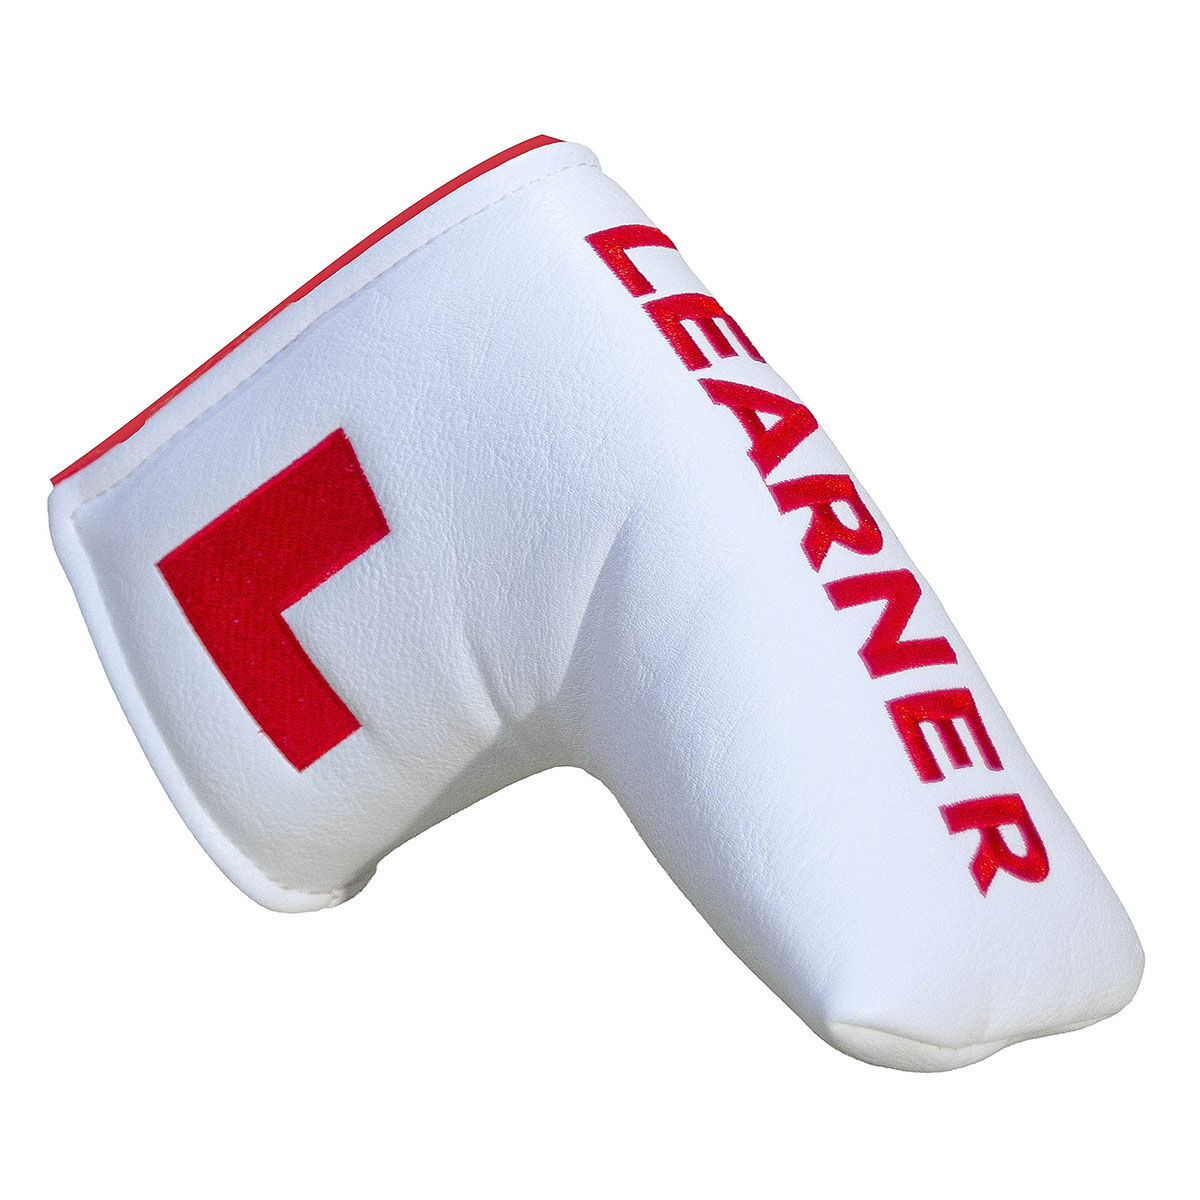 Krave Learner Blade Golf Putter Head Cover, Mens, Blade, White/red | American Golf